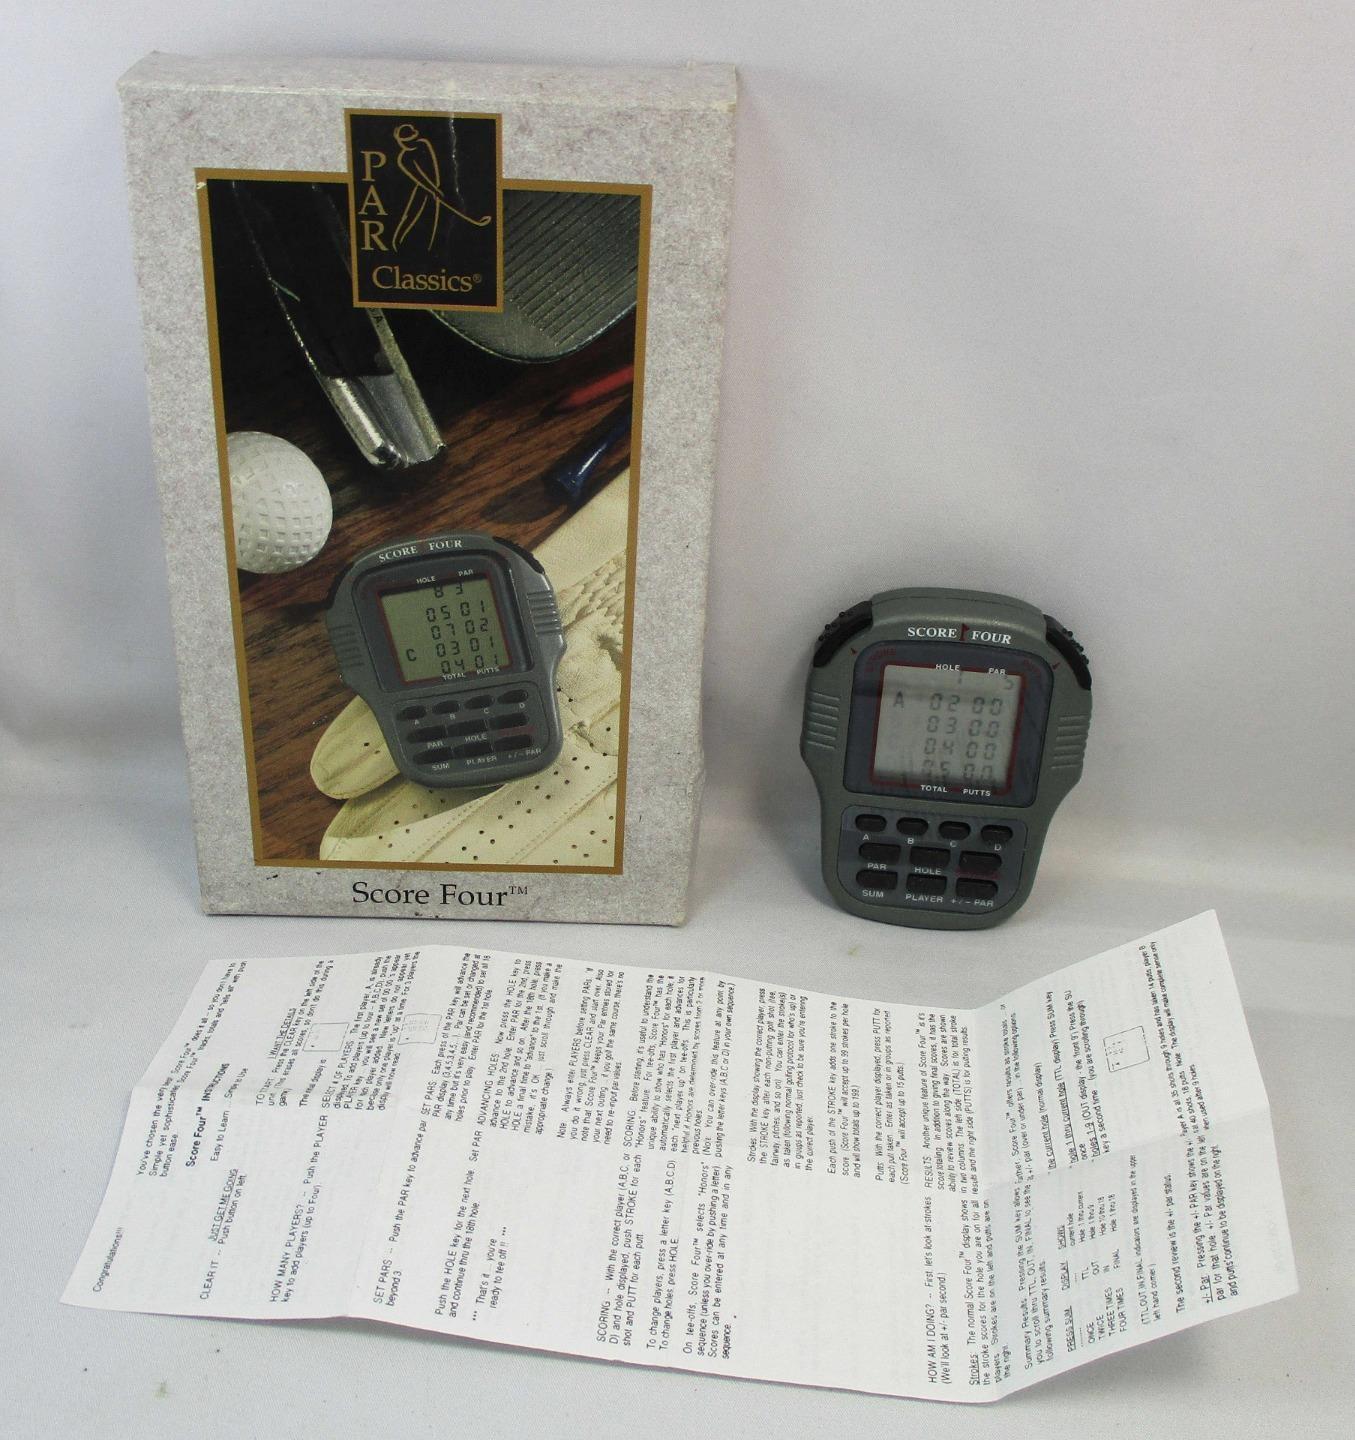 Par Classics Score Four Handheld Golf Scorekeeper With Manual - Tested & Working